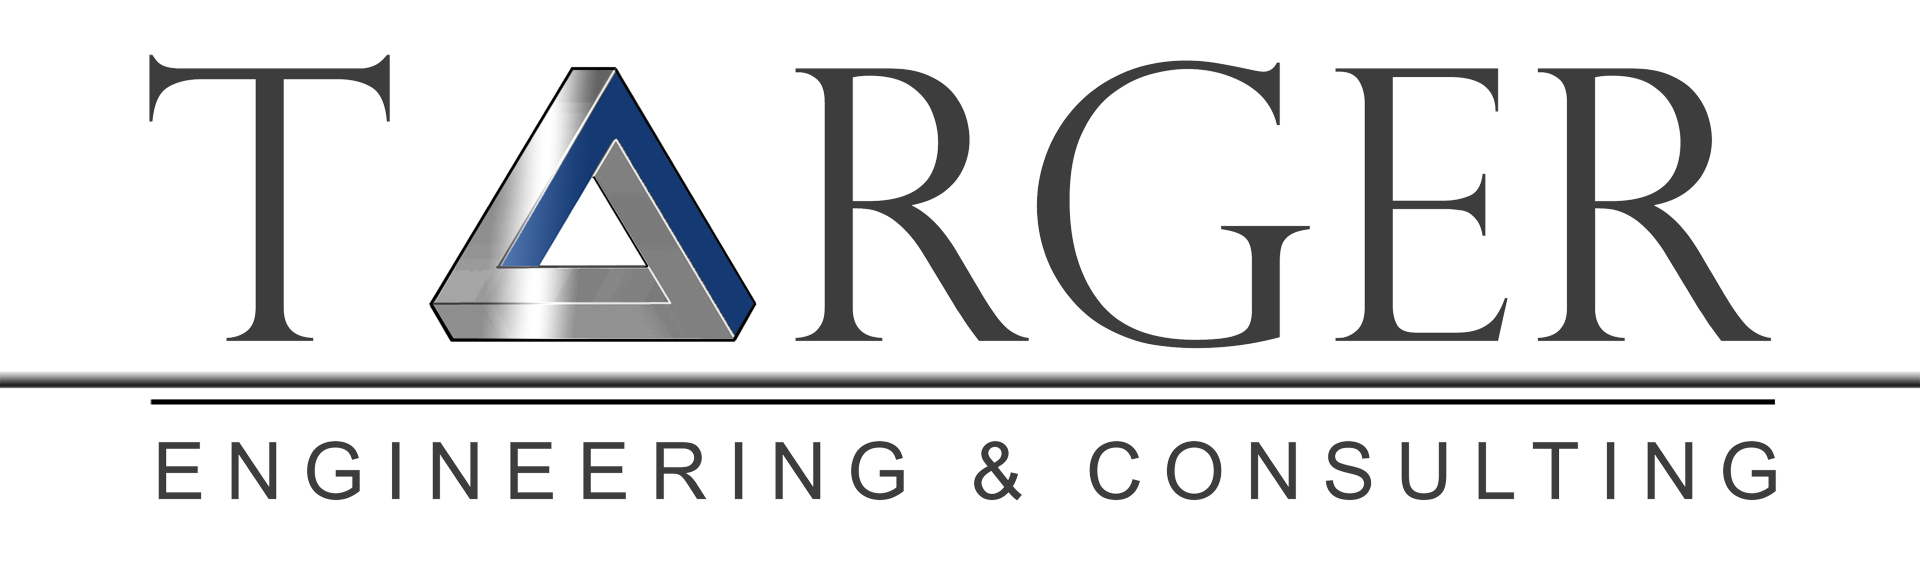 Targer - ENGINEERING & CONSULTING